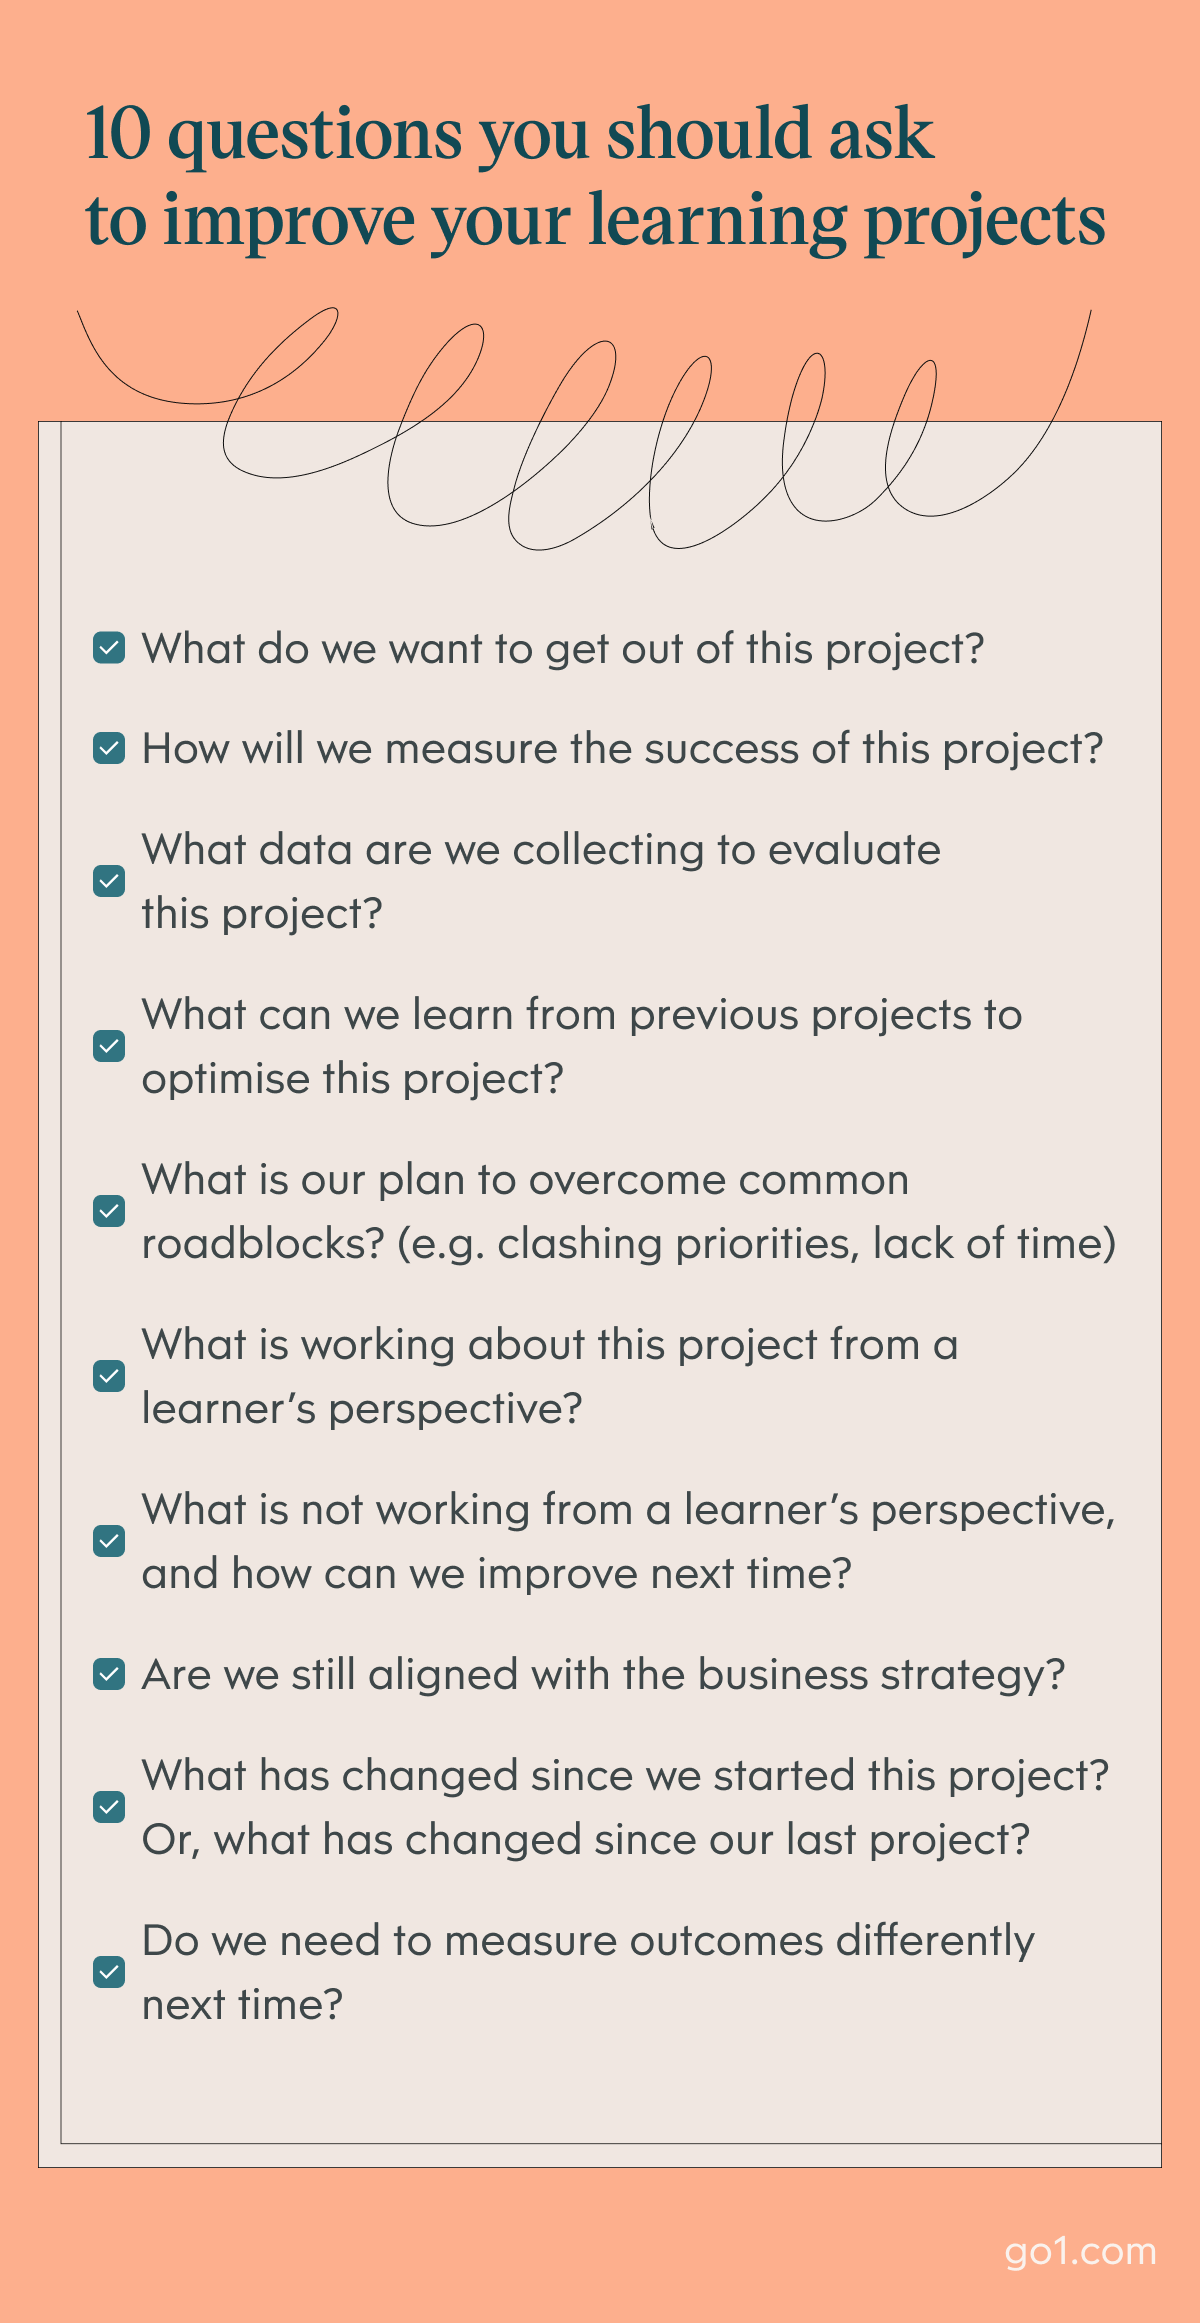 Infographic of 10 questions you should ask to improve your learning projects